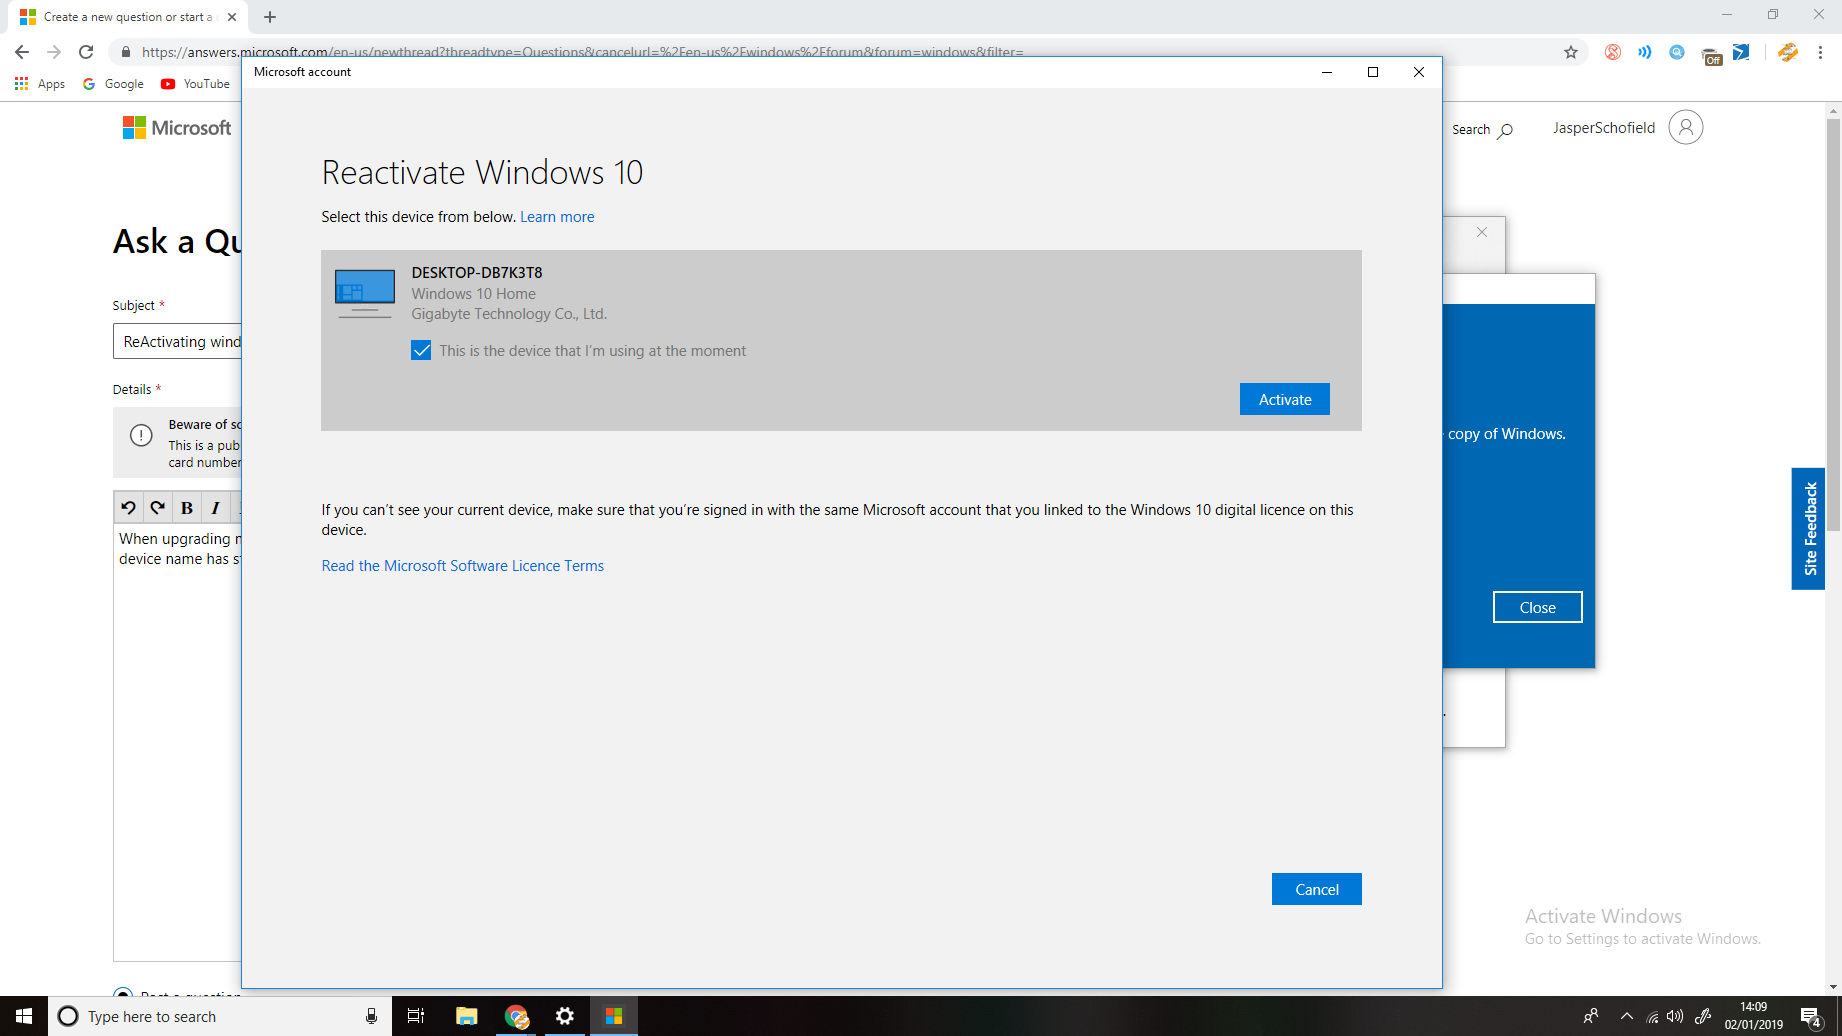 ReActivating windows 10 after hardware change 989f80ab-a717-4c1e-a13b-325faac95044?upload=true.png